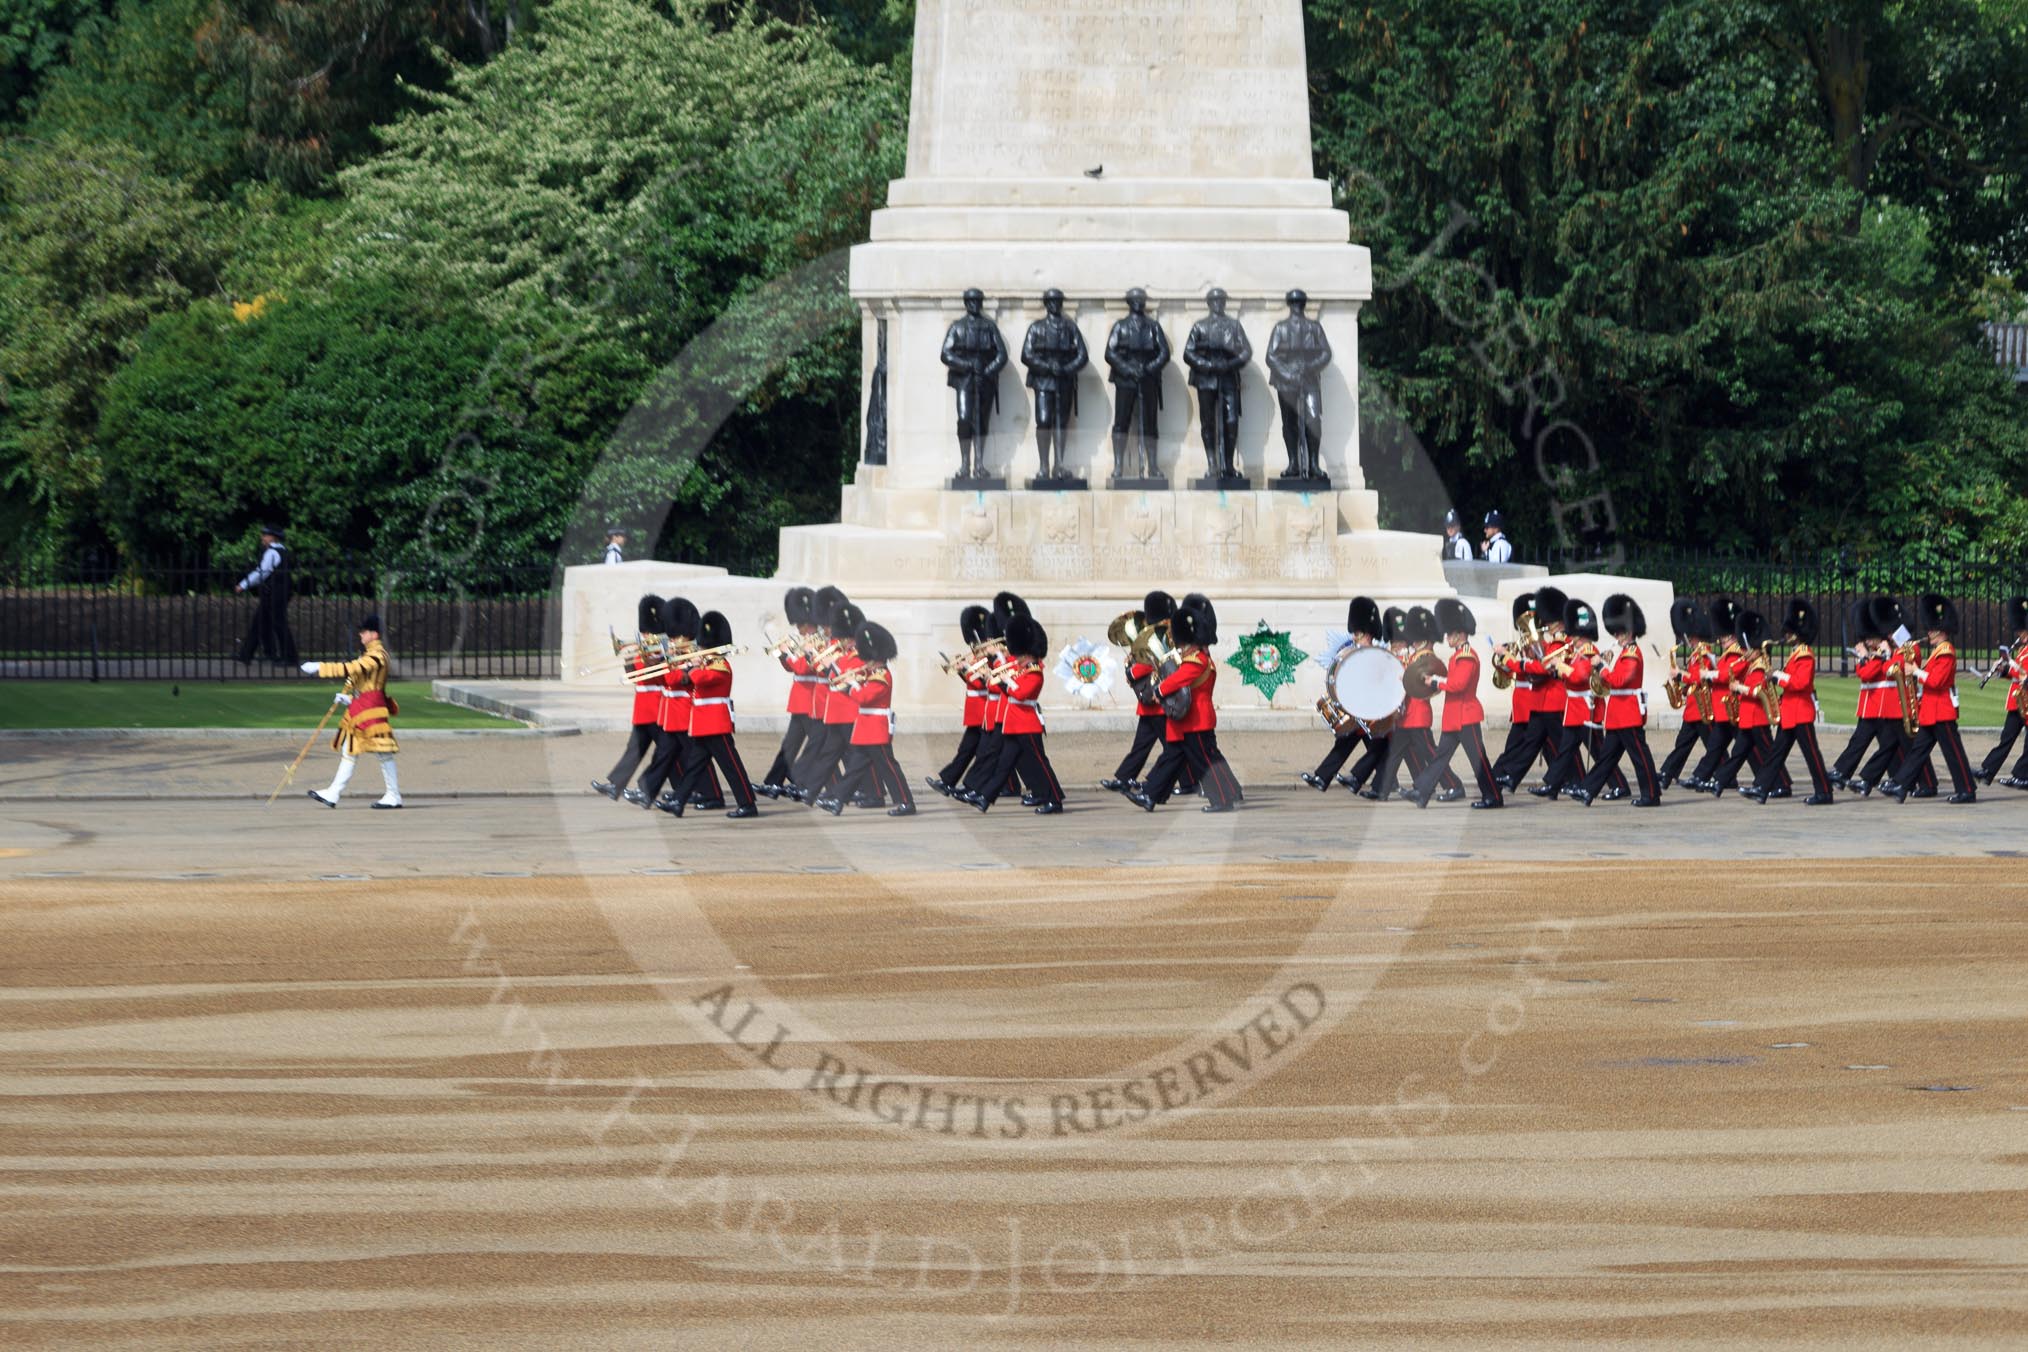 The Band of the Welsh Guards. led by Senior Drum Major Damian Thomas, Grenadier Guards, marching past the Guards Memorial during Trooping the Colour 2018, The Queen's Birthday Parade at Horse Guards Parade, Westminster, London, 9 June 2018, 10:13.